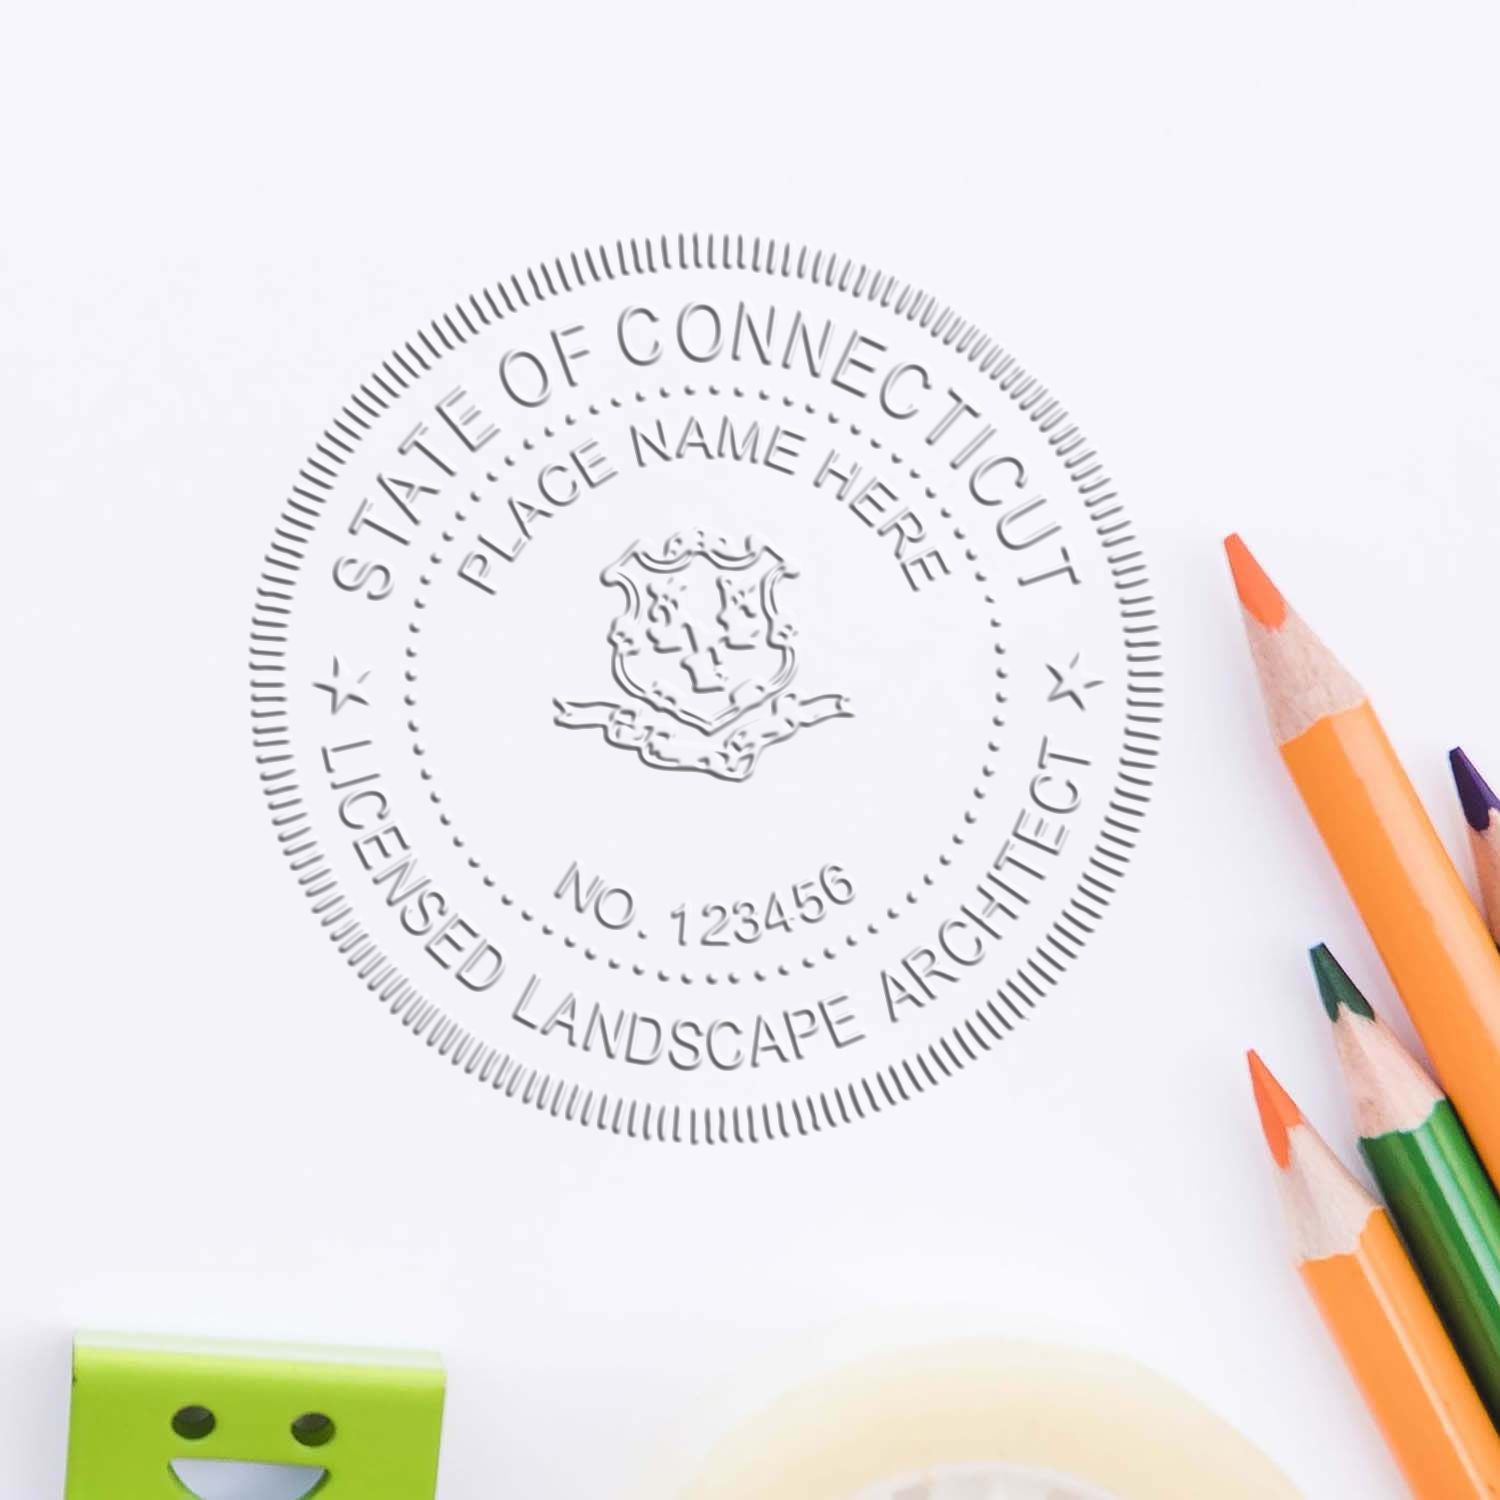 The Connecticut Desk Landscape Architectural Seal Embosser stamp impression comes to life with a crisp, detailed photo on paper - showcasing true professional quality.